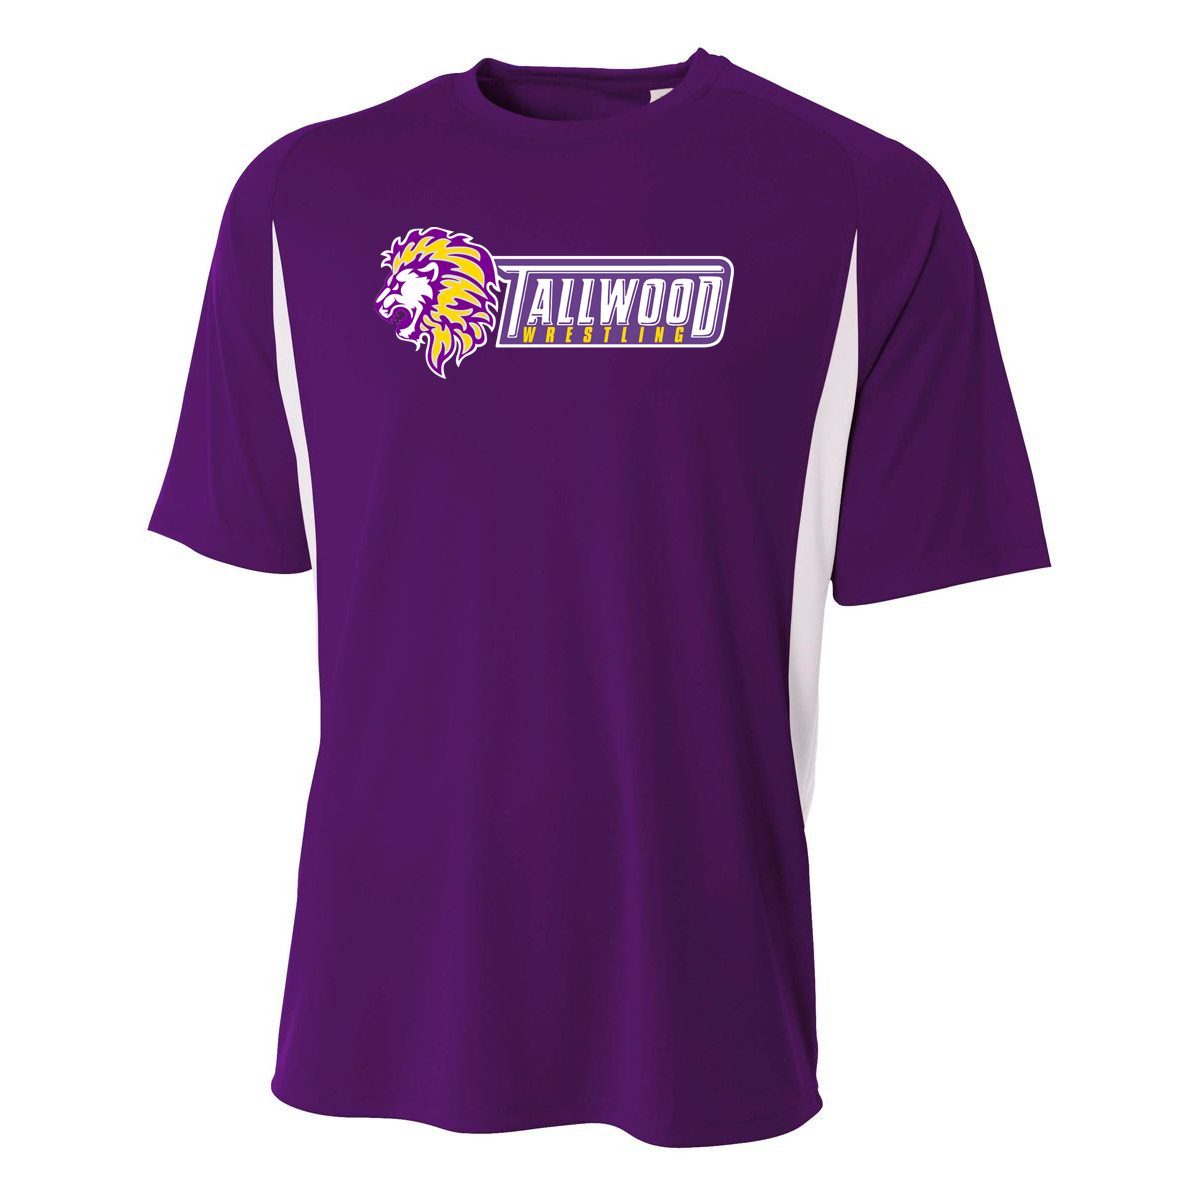 Tallwood Wrestling A4 Color Blocked Cooling Performance T-Shirt